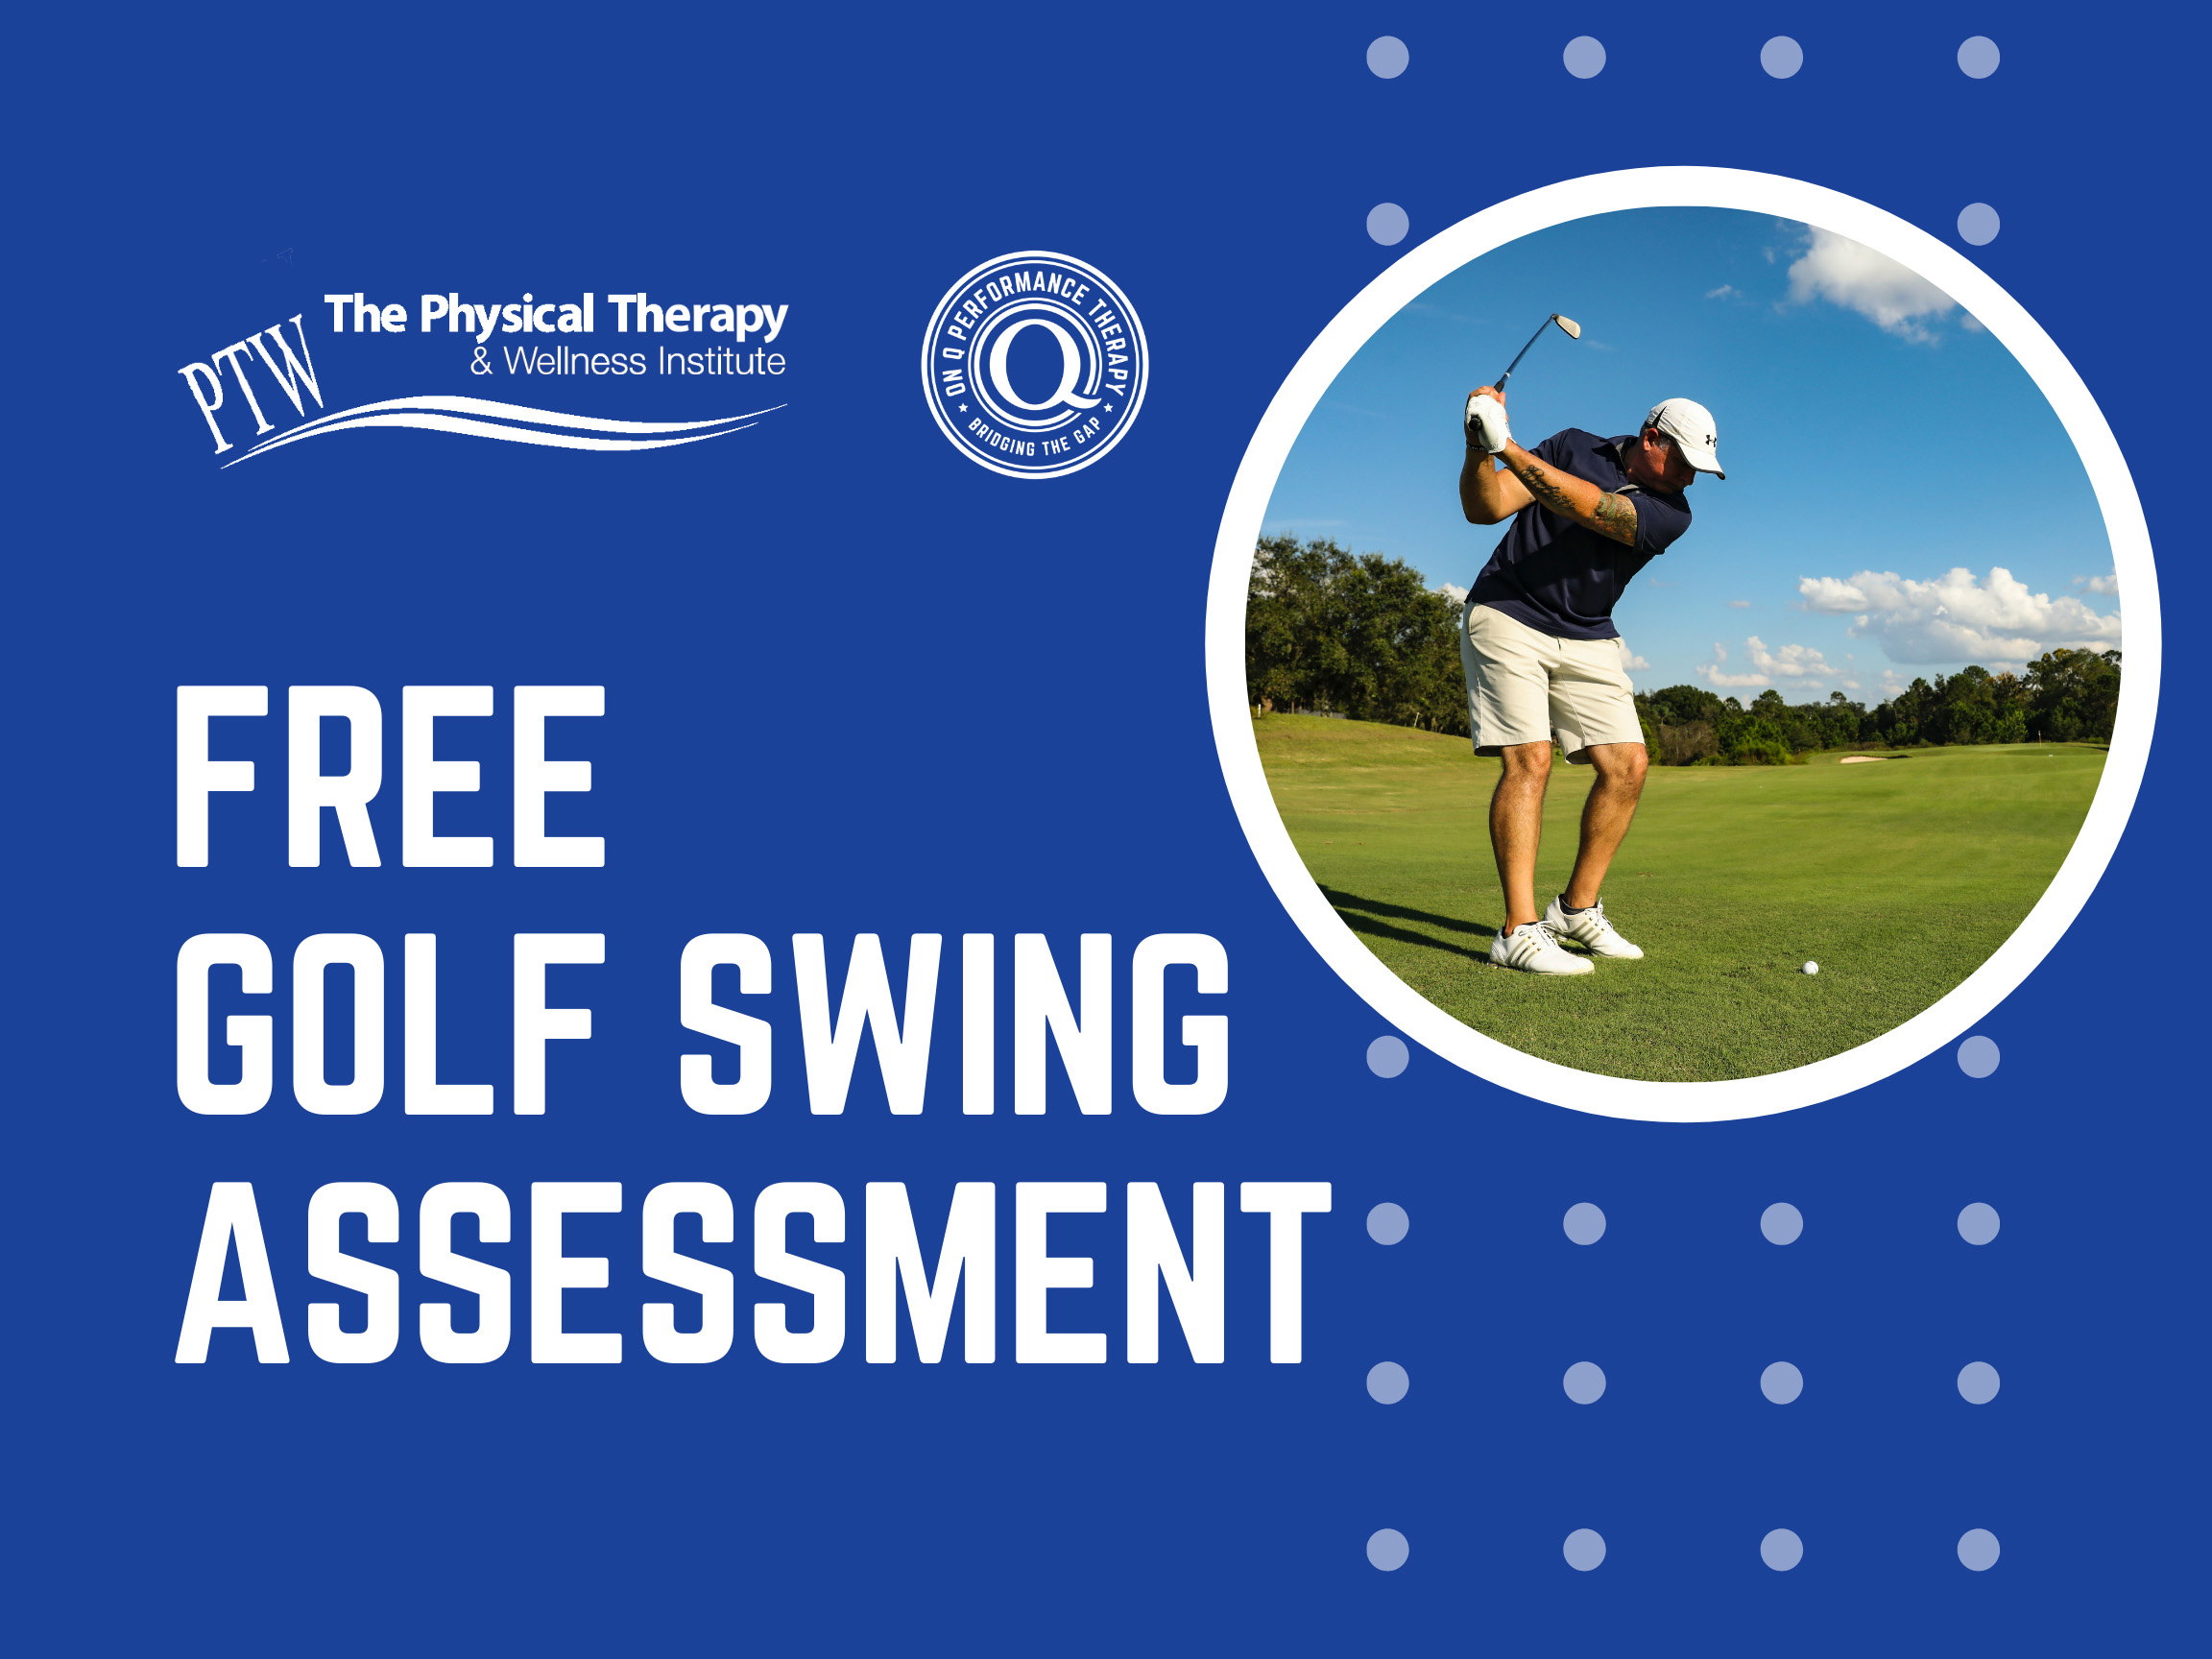 Ad for a free golf swing assessment at the Physical Therapy and Wellness Institute.